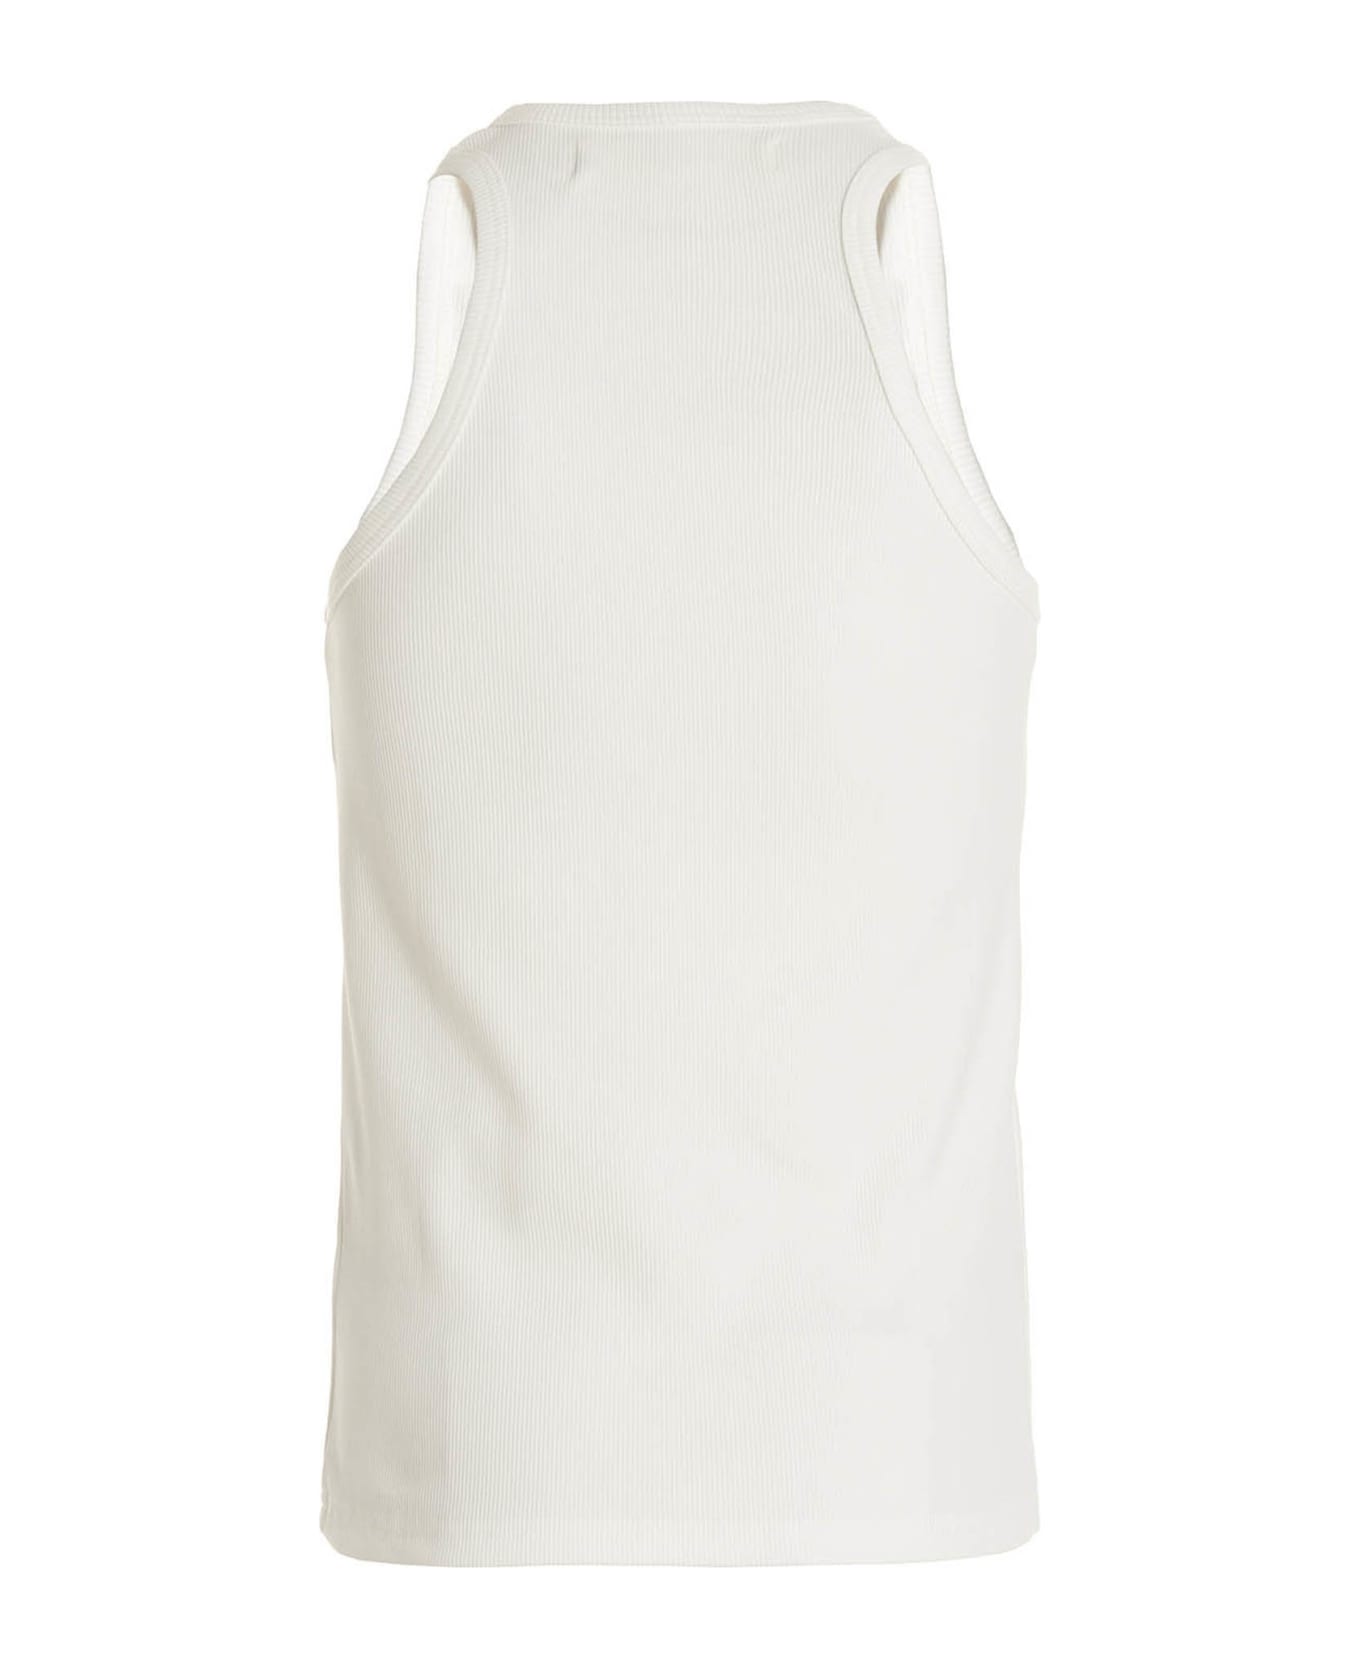 MISBHV Logo Embroidery Tank Top - White